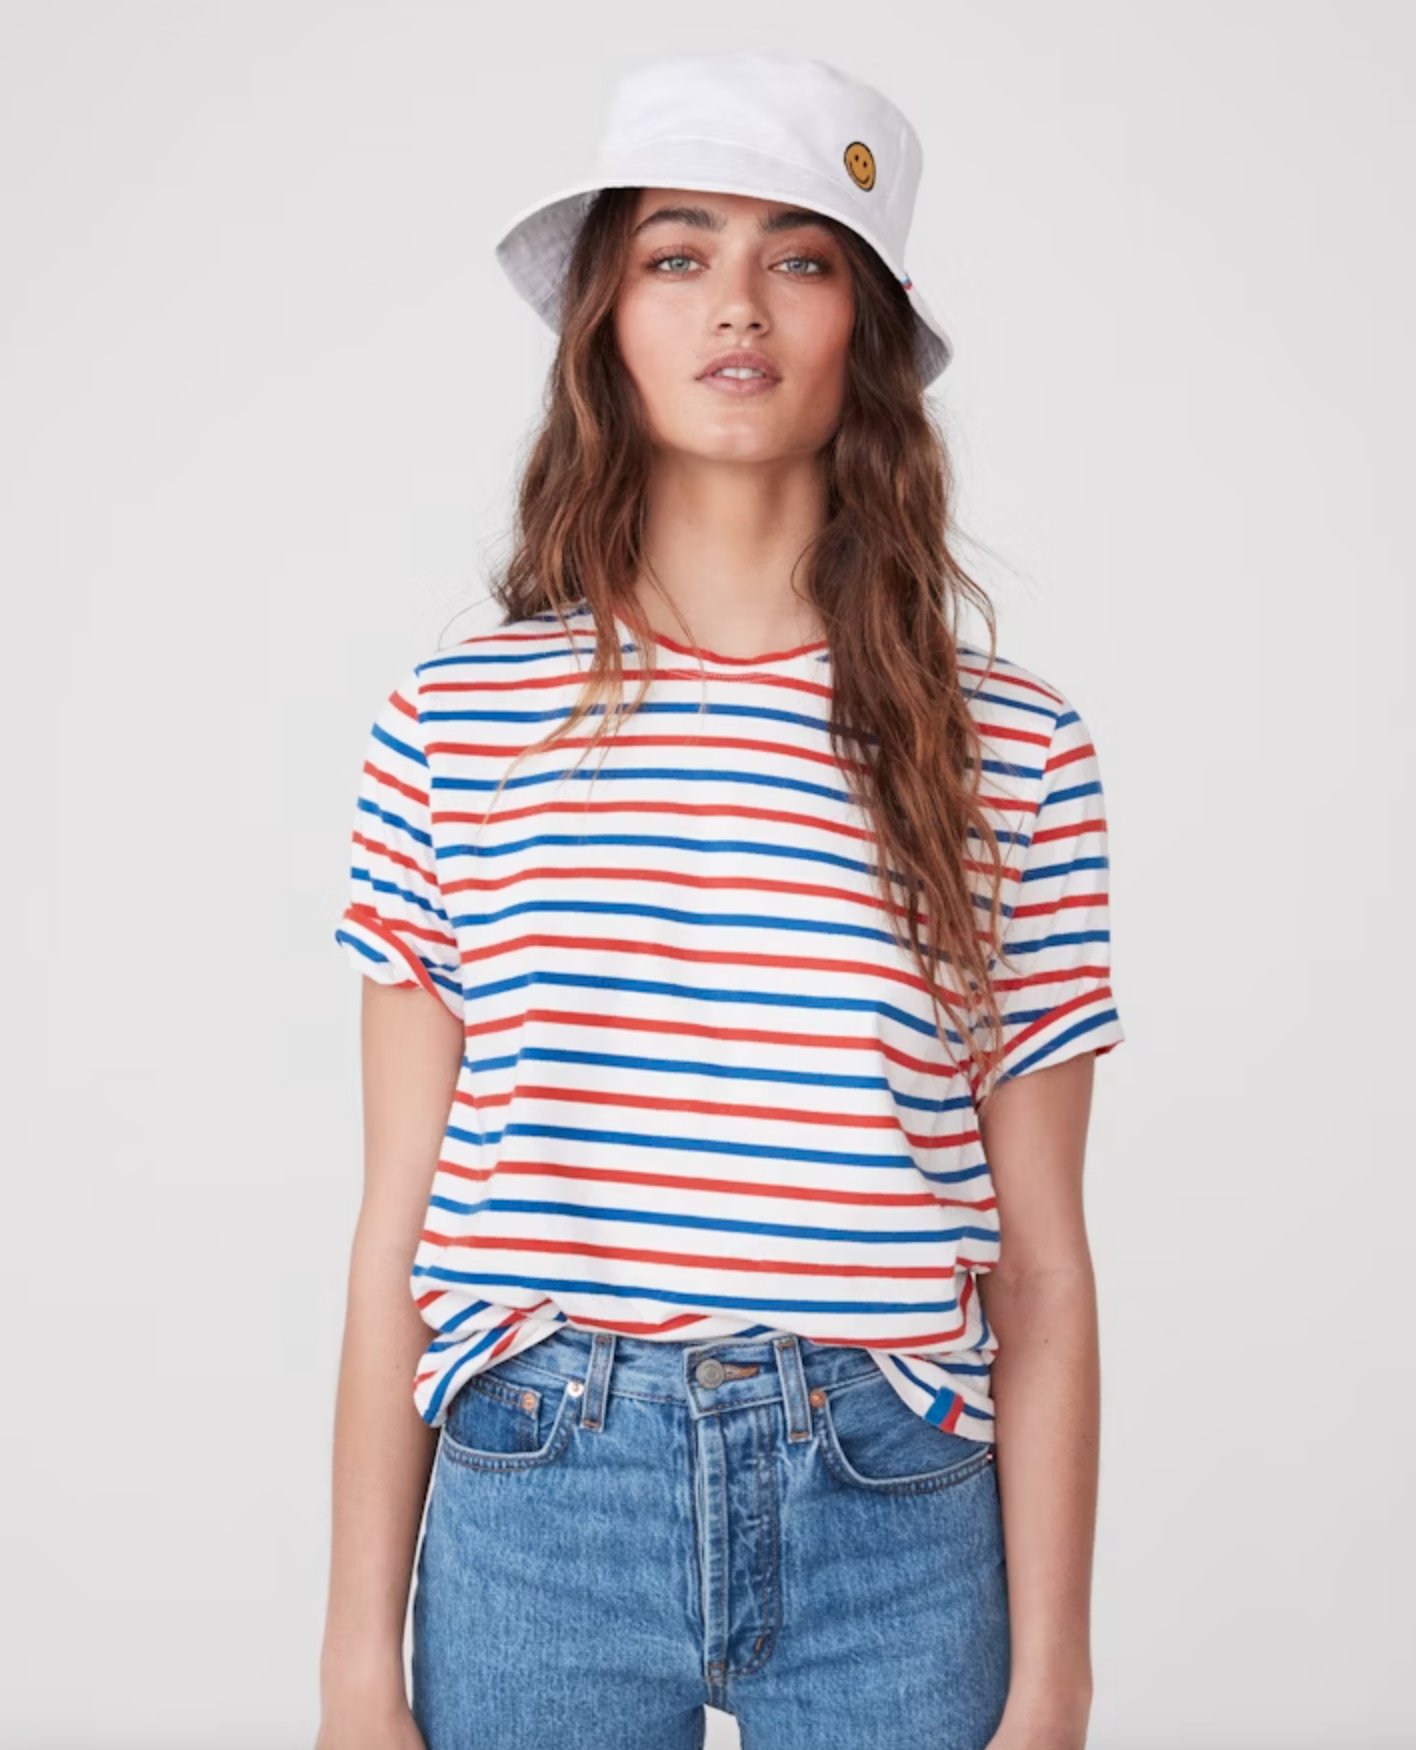 A woman with long brown hair is wearing a white bucket hat with a small smiley face patch, The Modern from Kule featuring red, blue, and white horizontal stripes, and blue jeans. She is standing against a plain white background, looking directly at the camera.